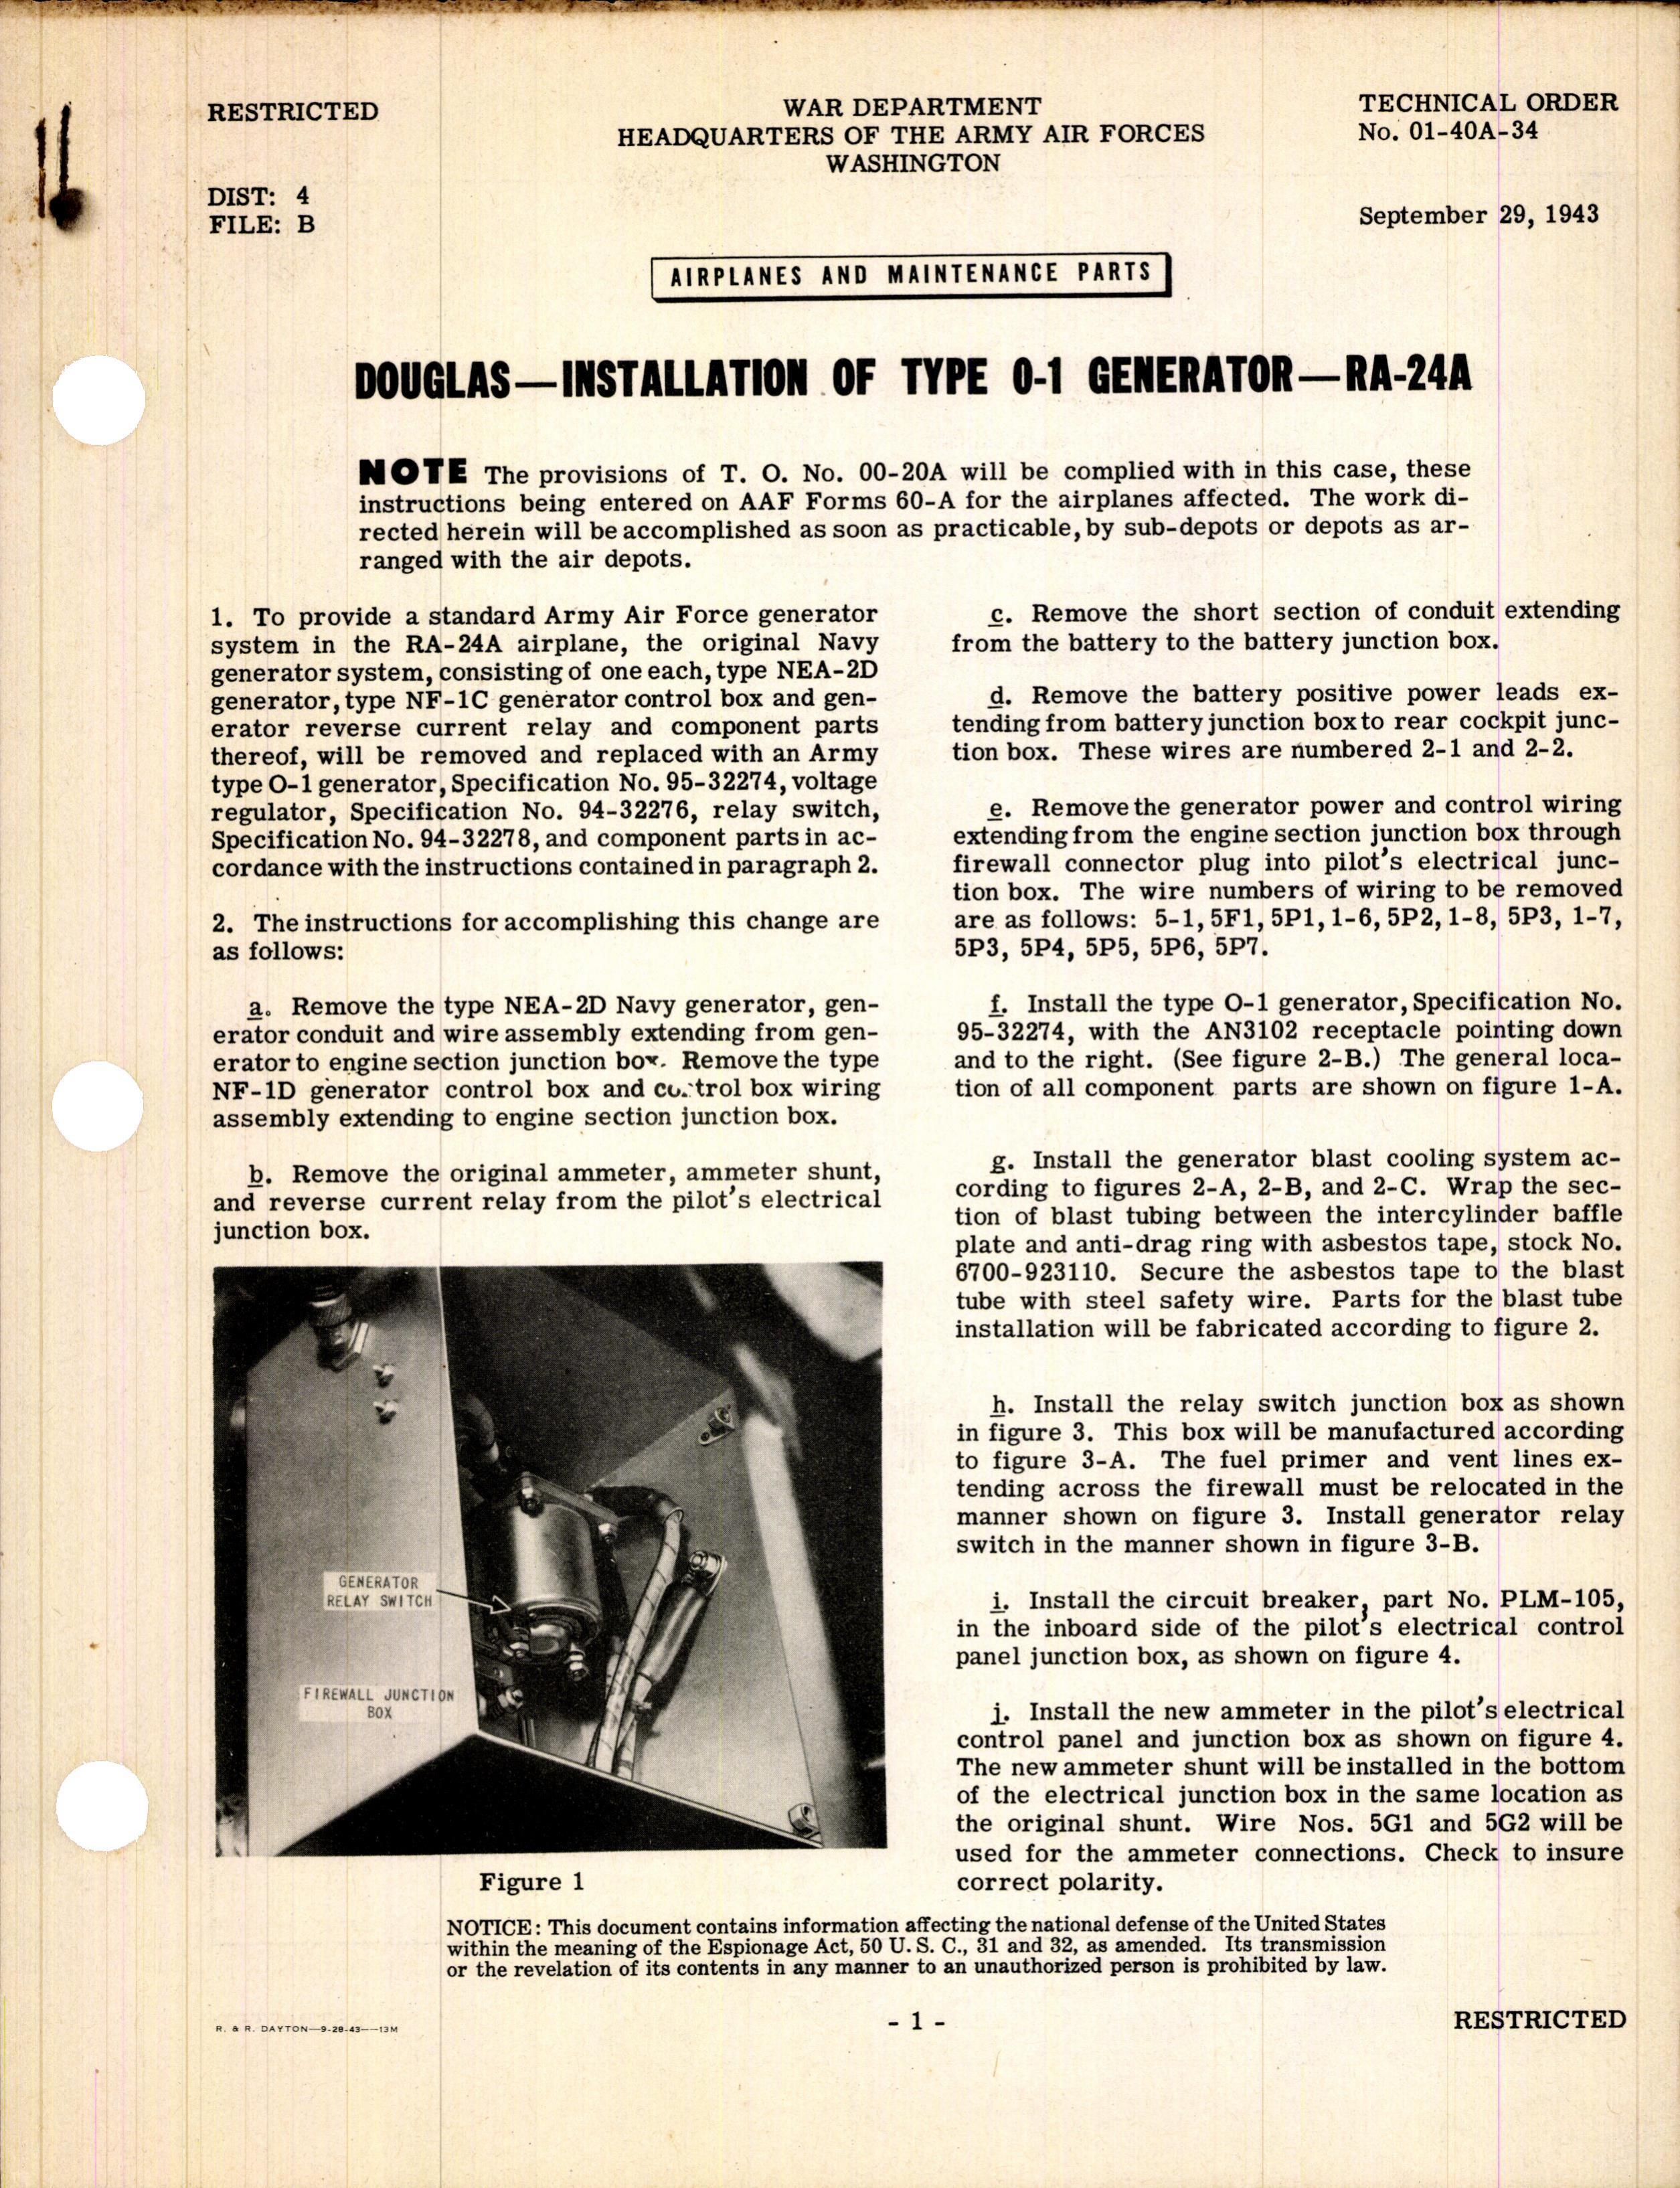 Sample page 1 from AirCorps Library document: Installation of Type 0-1 Generator for RA-24A